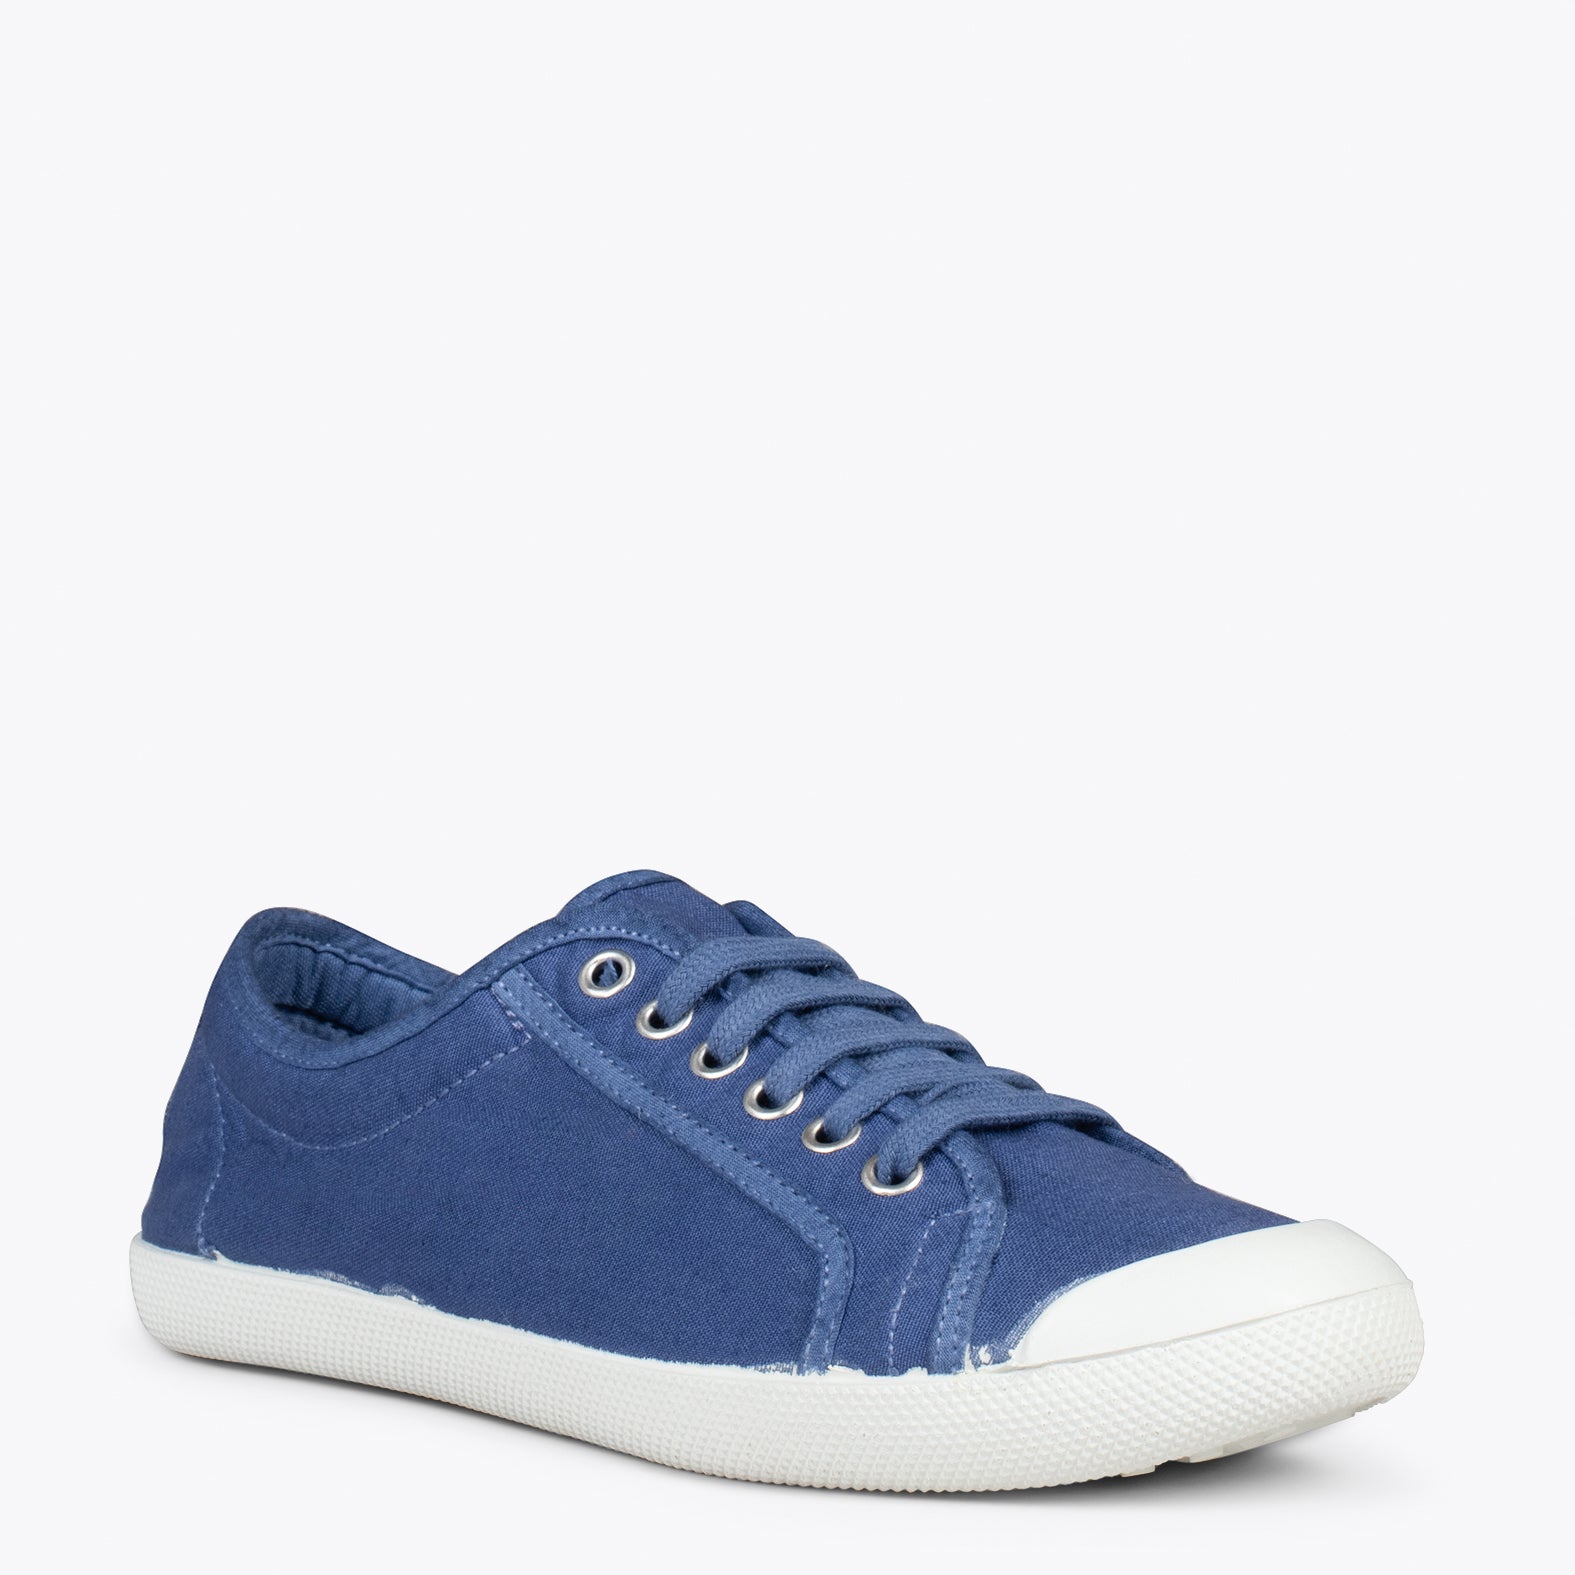 BAOBAB – JEANS BCI cotton sneakers from IO&GO